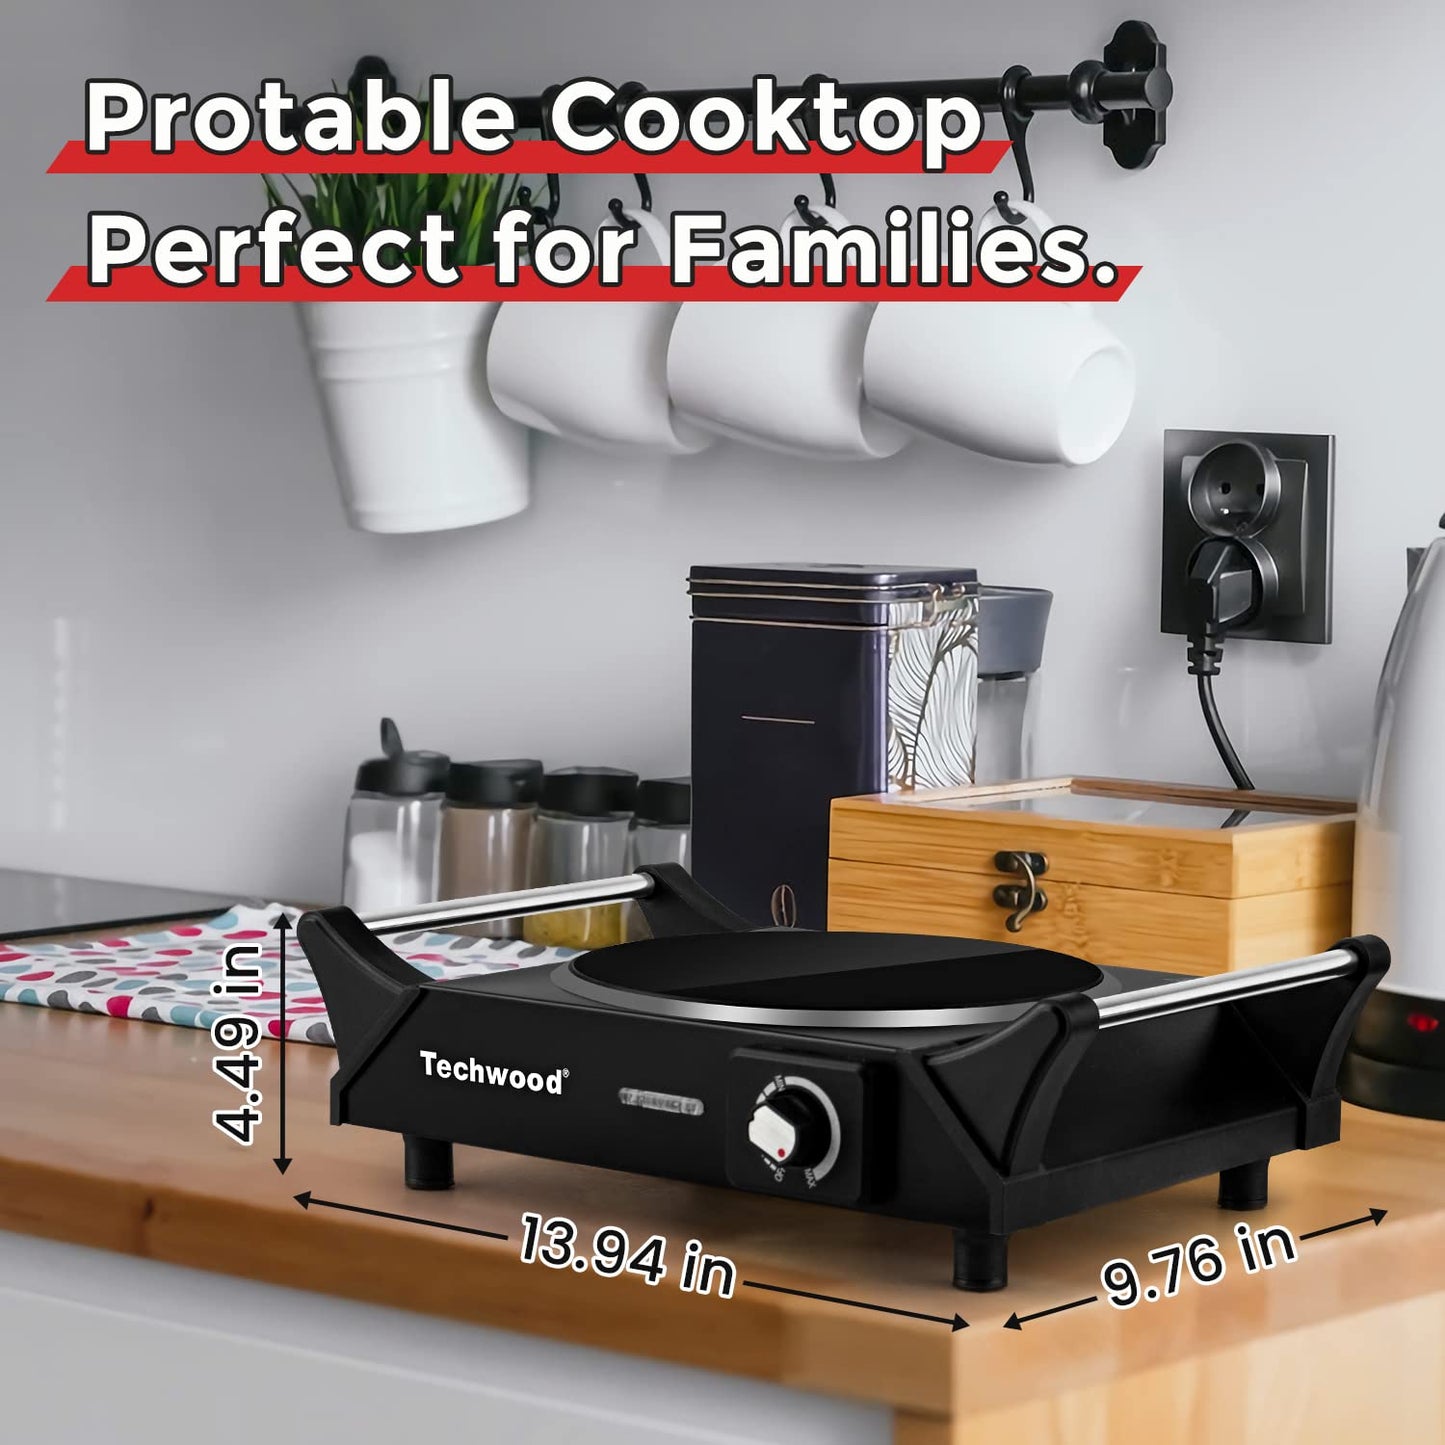 Techwood 1200W Infrared Ceramic 7.5" Glass Single Hot Plate with Stay Cool Handle(Black)